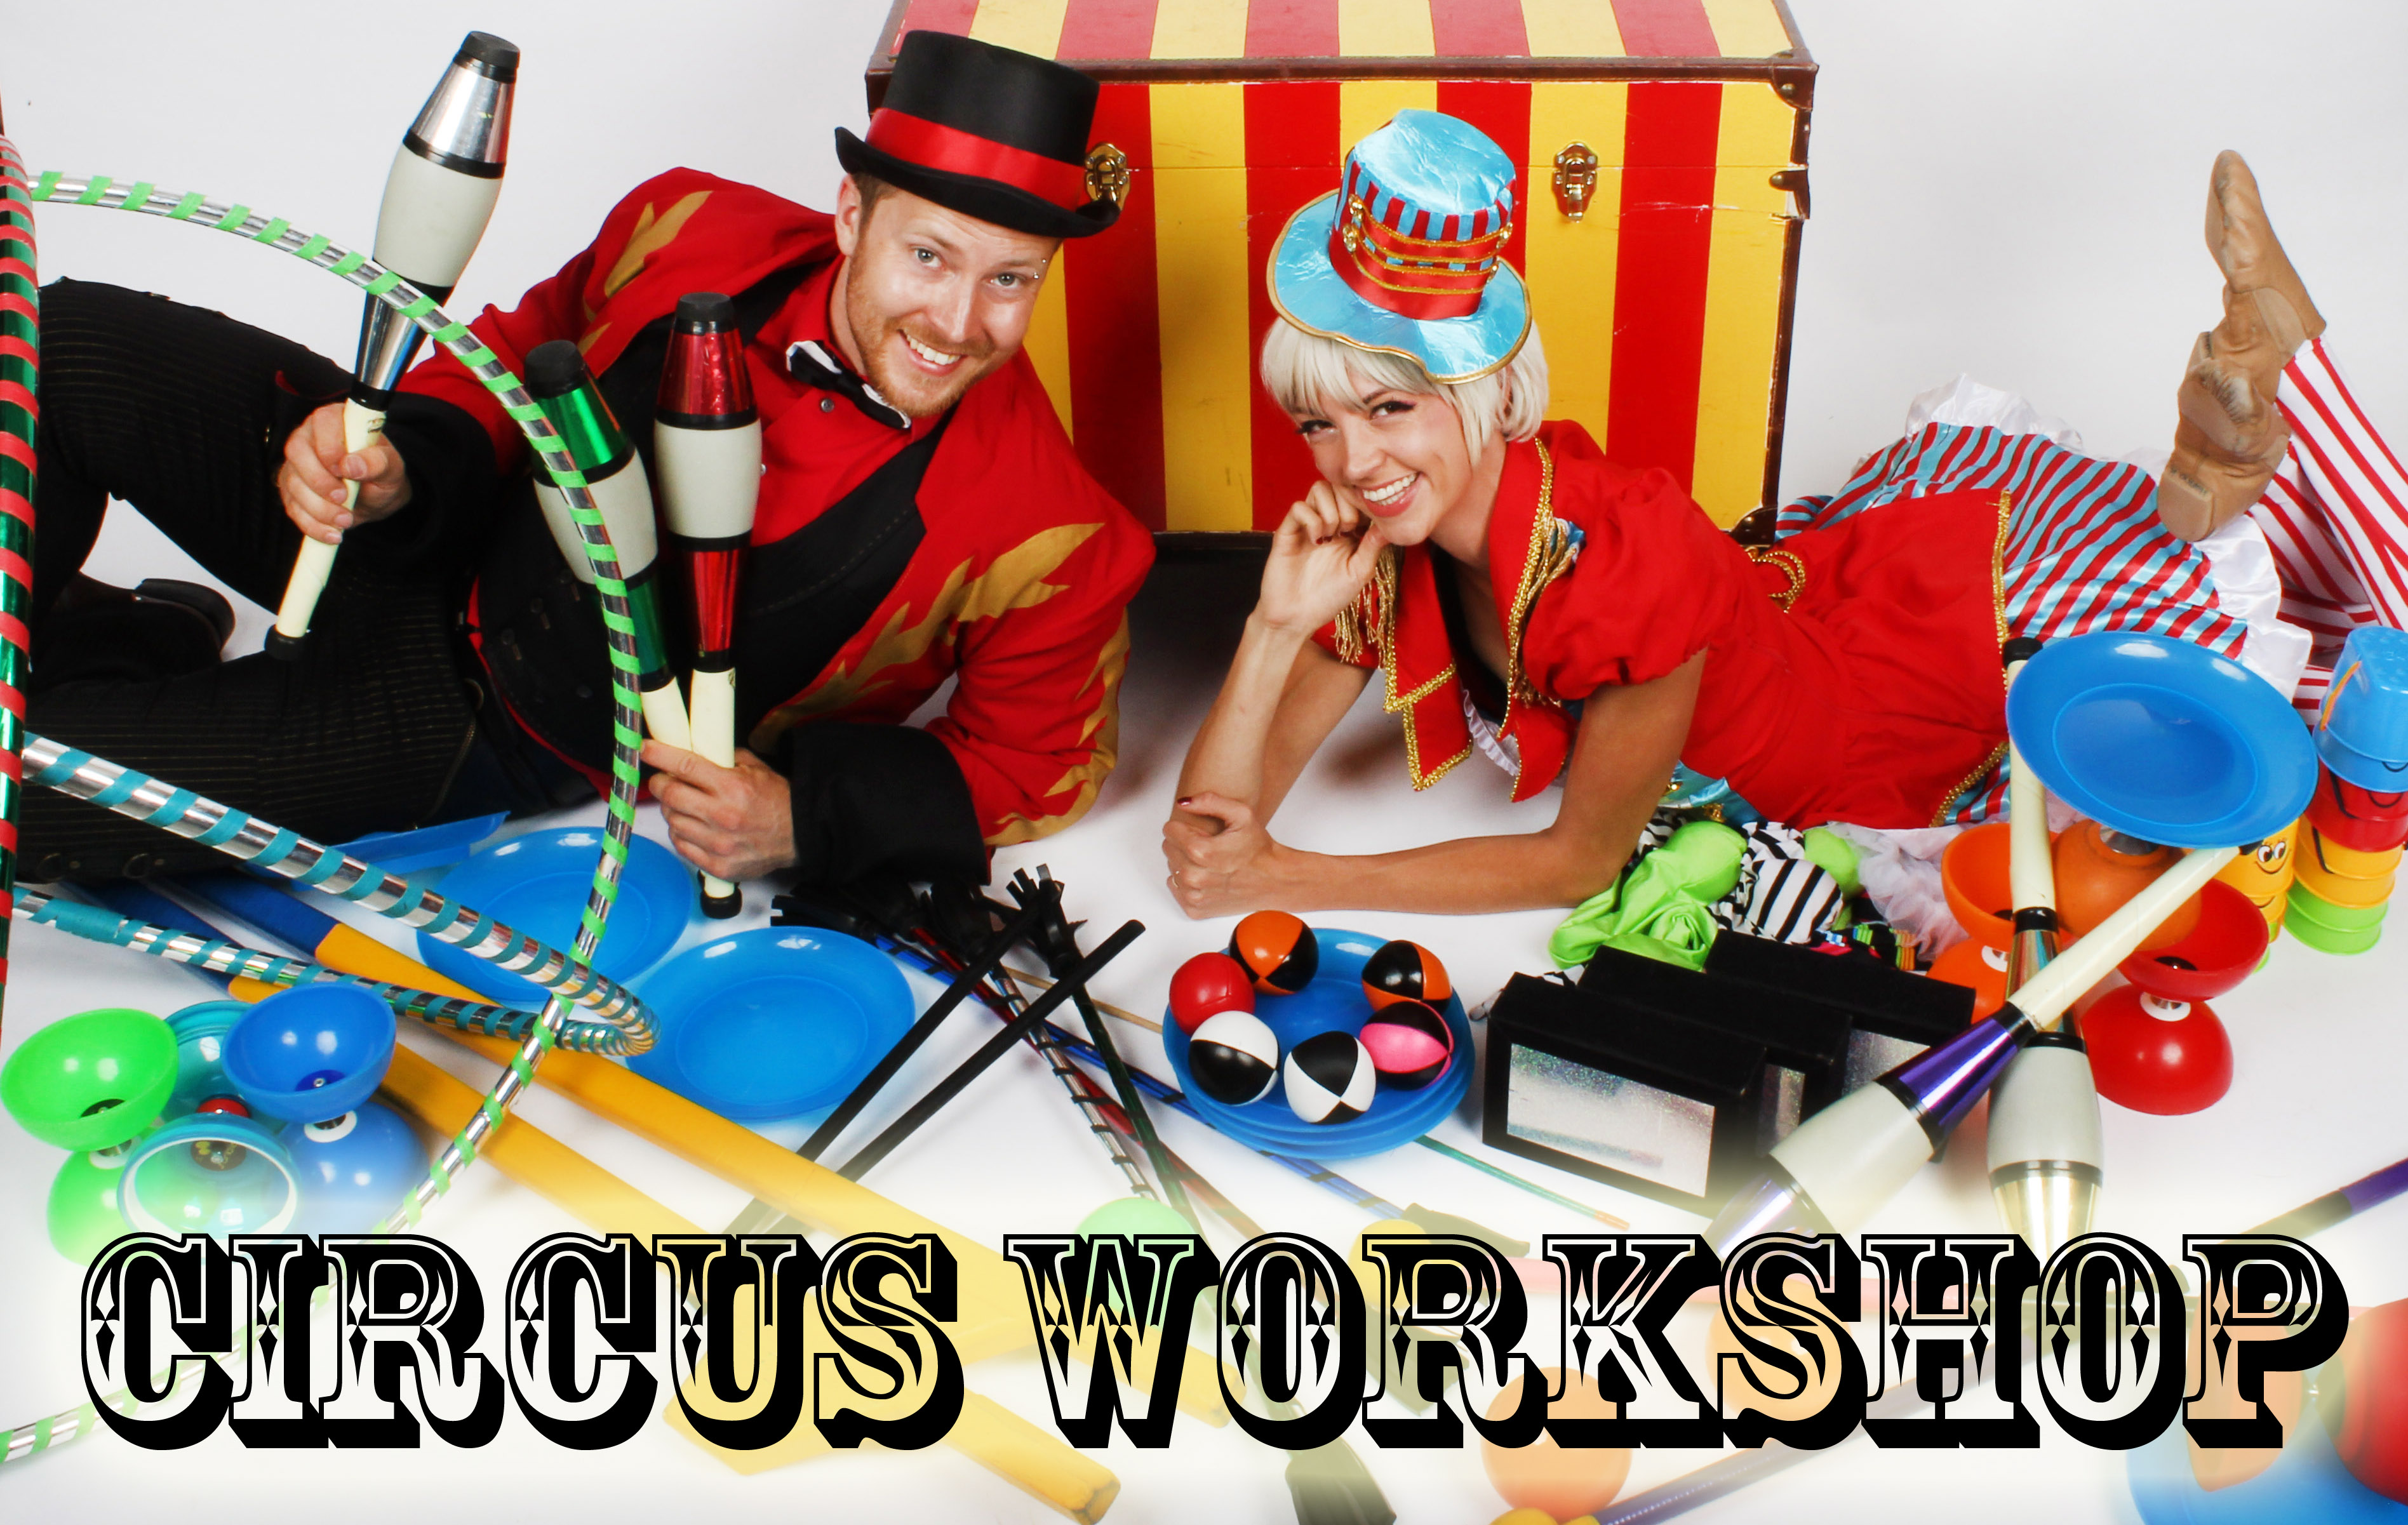 Kids, Circus, Workshop, Carnival, Props, Toys